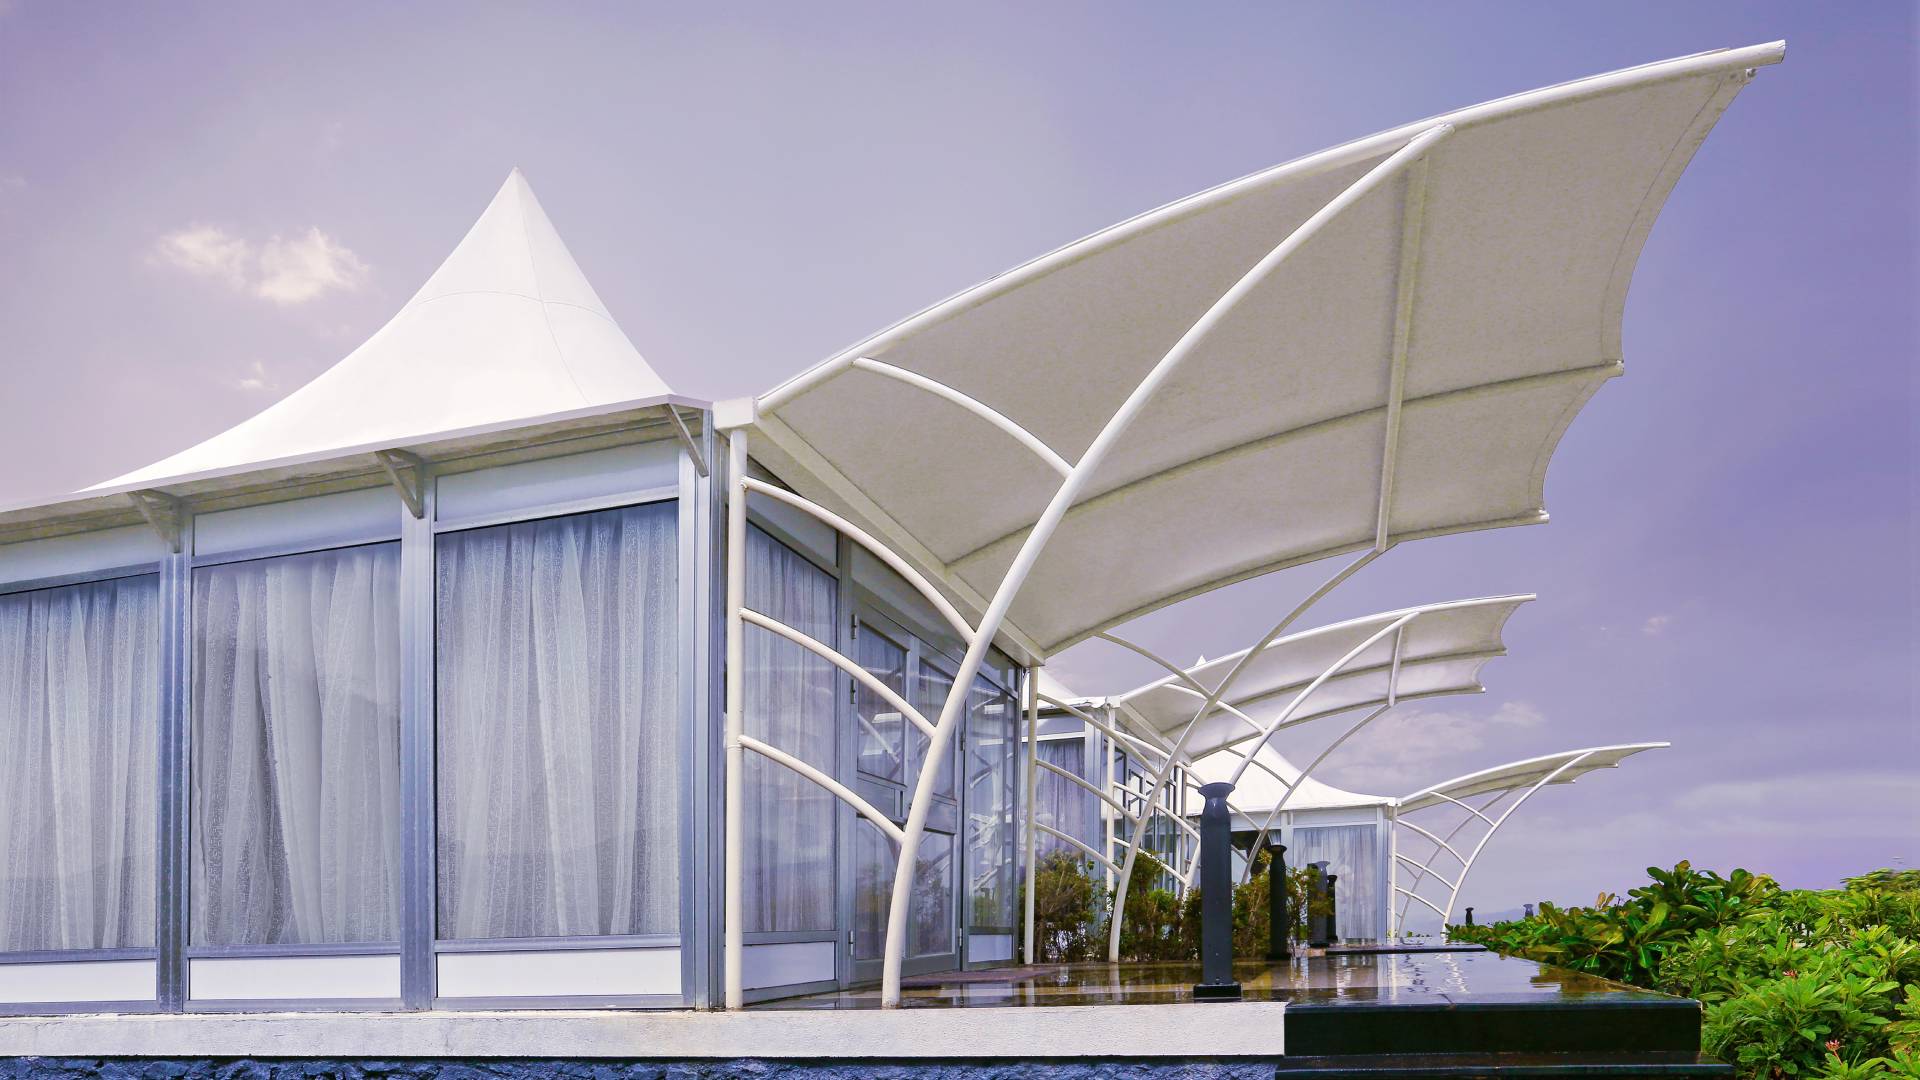 THE TOPAZ AC LUXURIOUS GLASS TENTS at Sunny's World Pune (11)